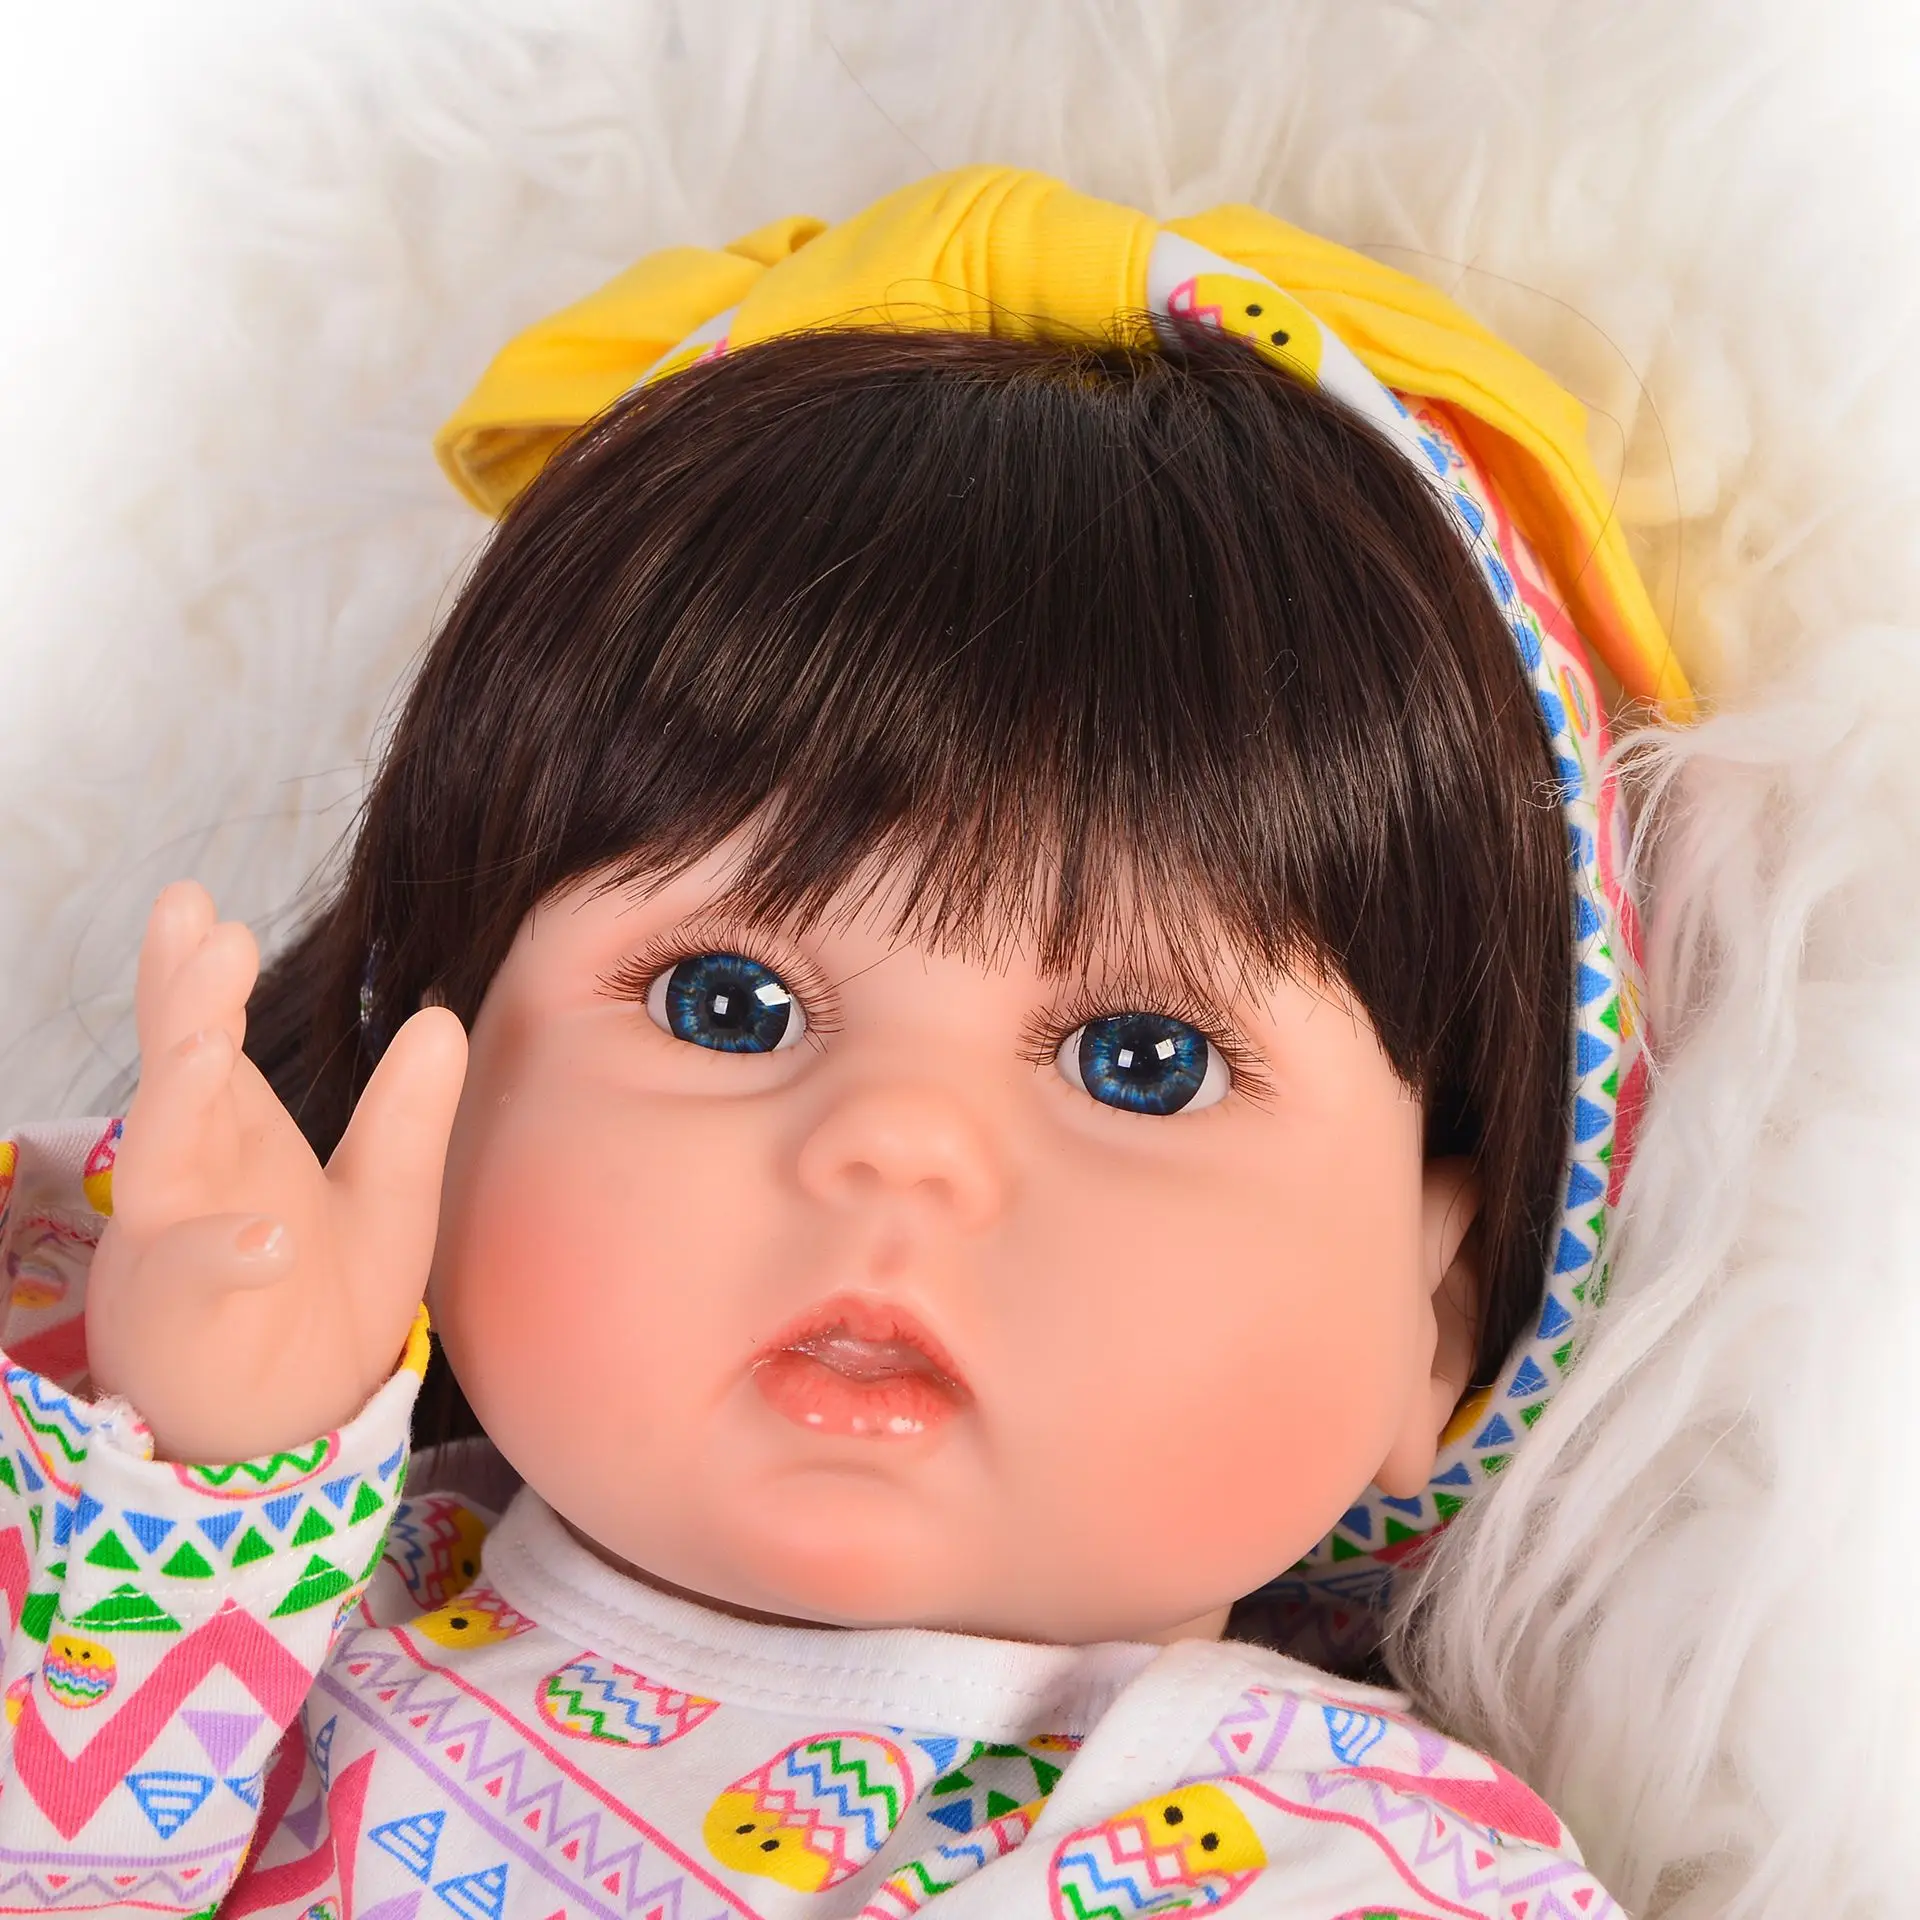  Keiumi Long Hair Reborn Baby Doll New Style Model Infant 55 Cm Hot Selling